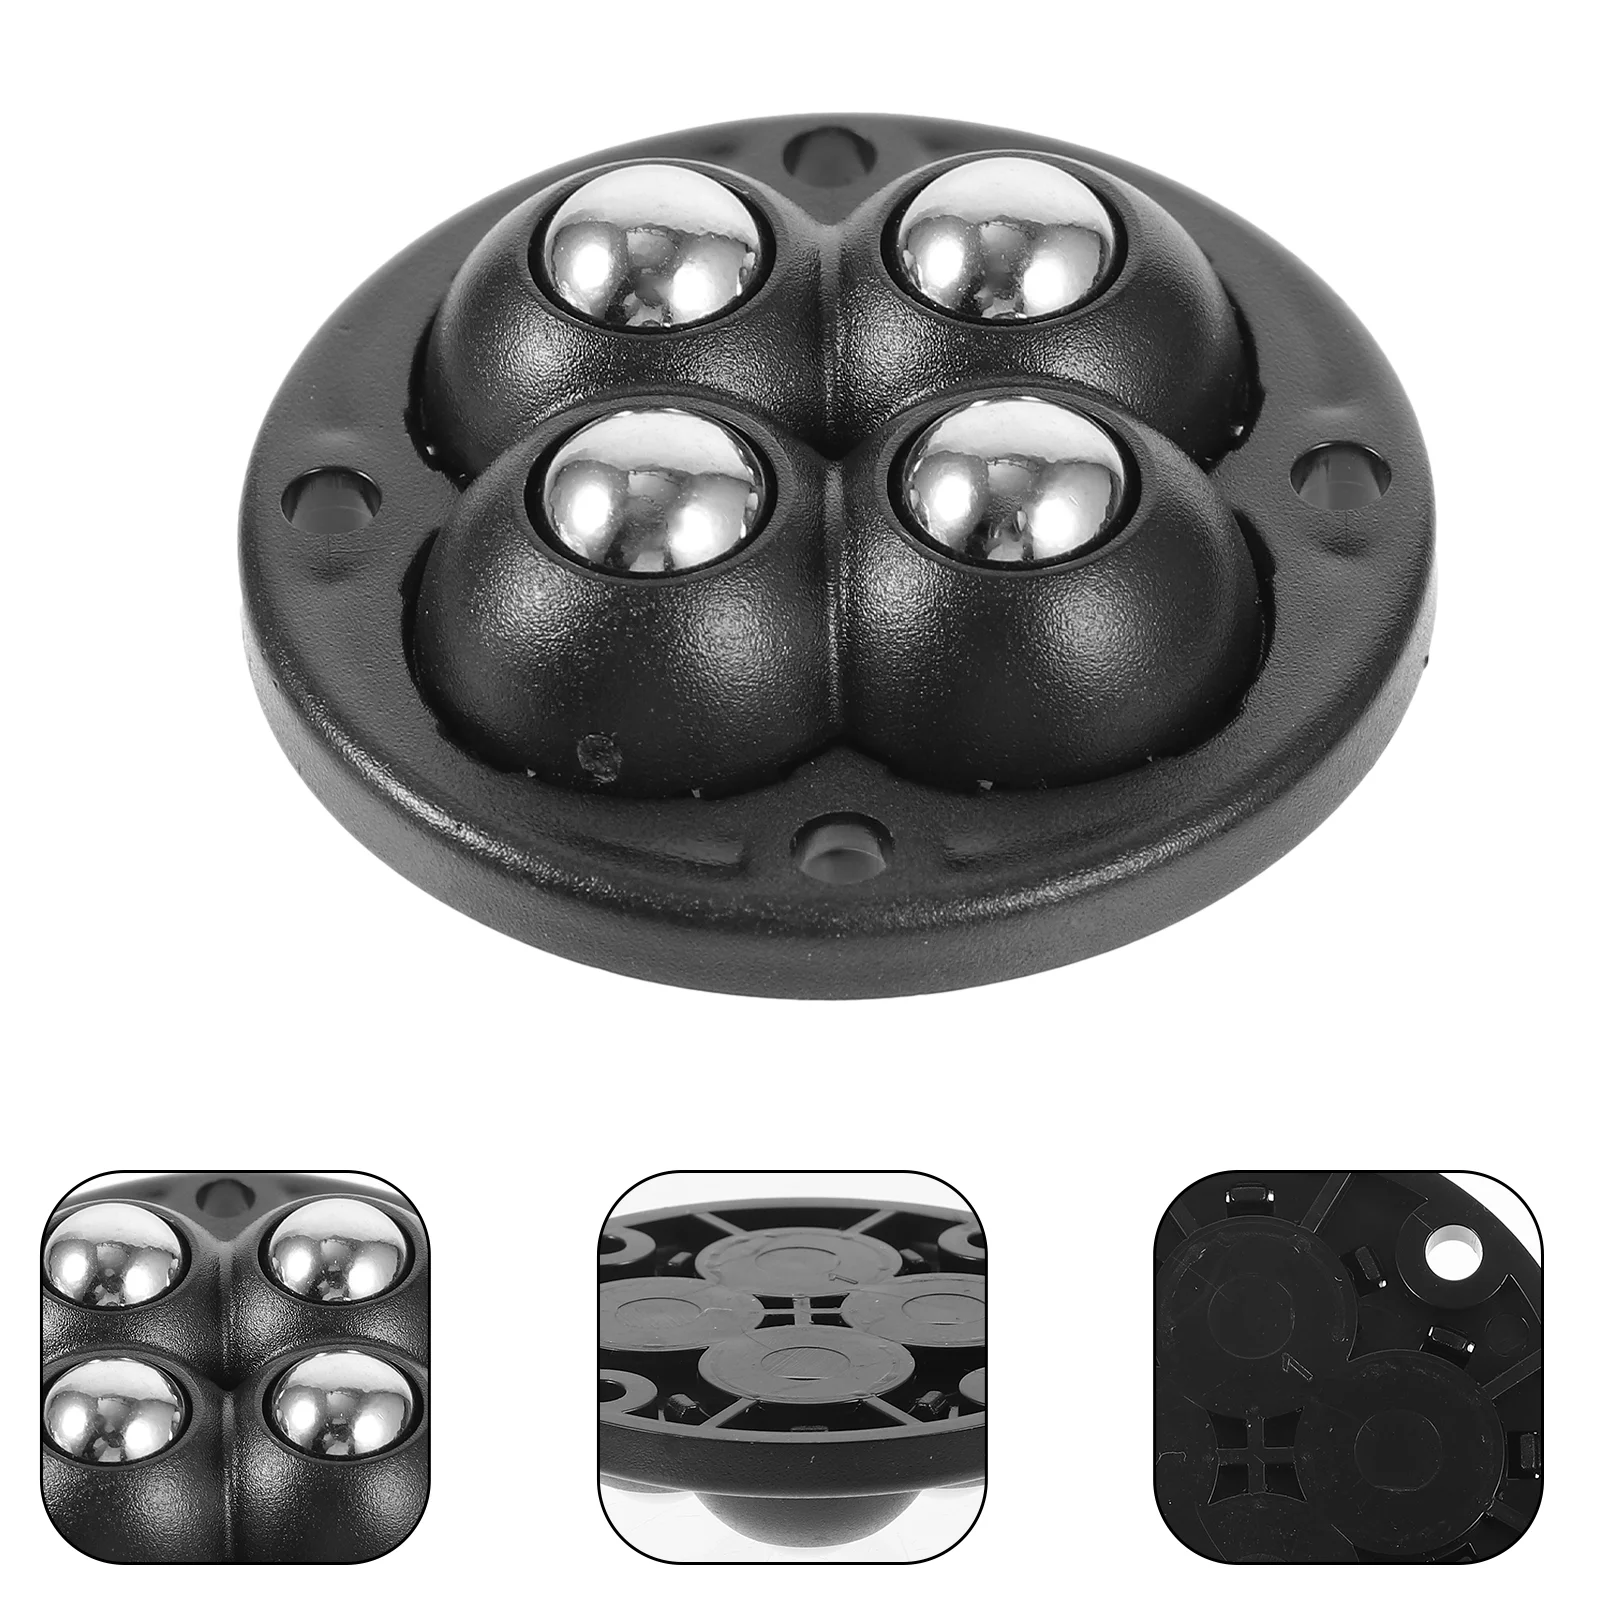 

4 Pcs Ball Pulley Mini Casters Small Appliances Wheels Adhesive Storage Crates Garbage Can Swivel Castors Abs Trash Bin